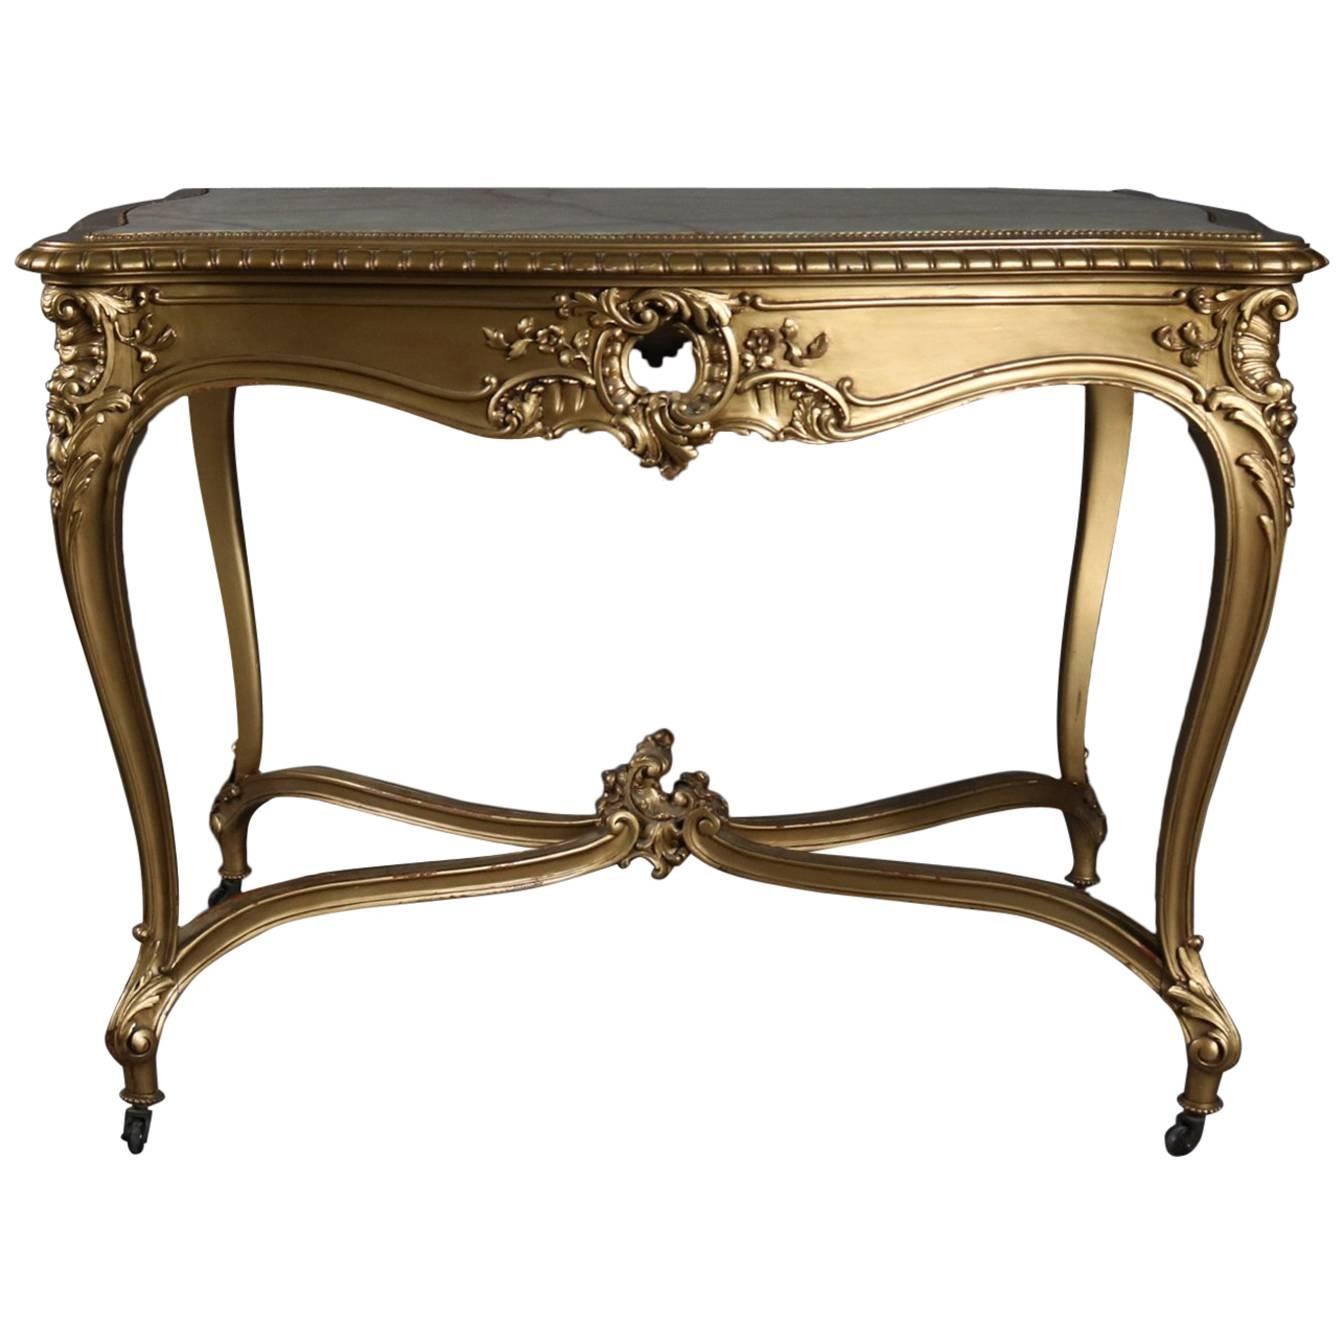 Antique French Louis XIV Giltwood and Onyx Centre Table, 19th Century